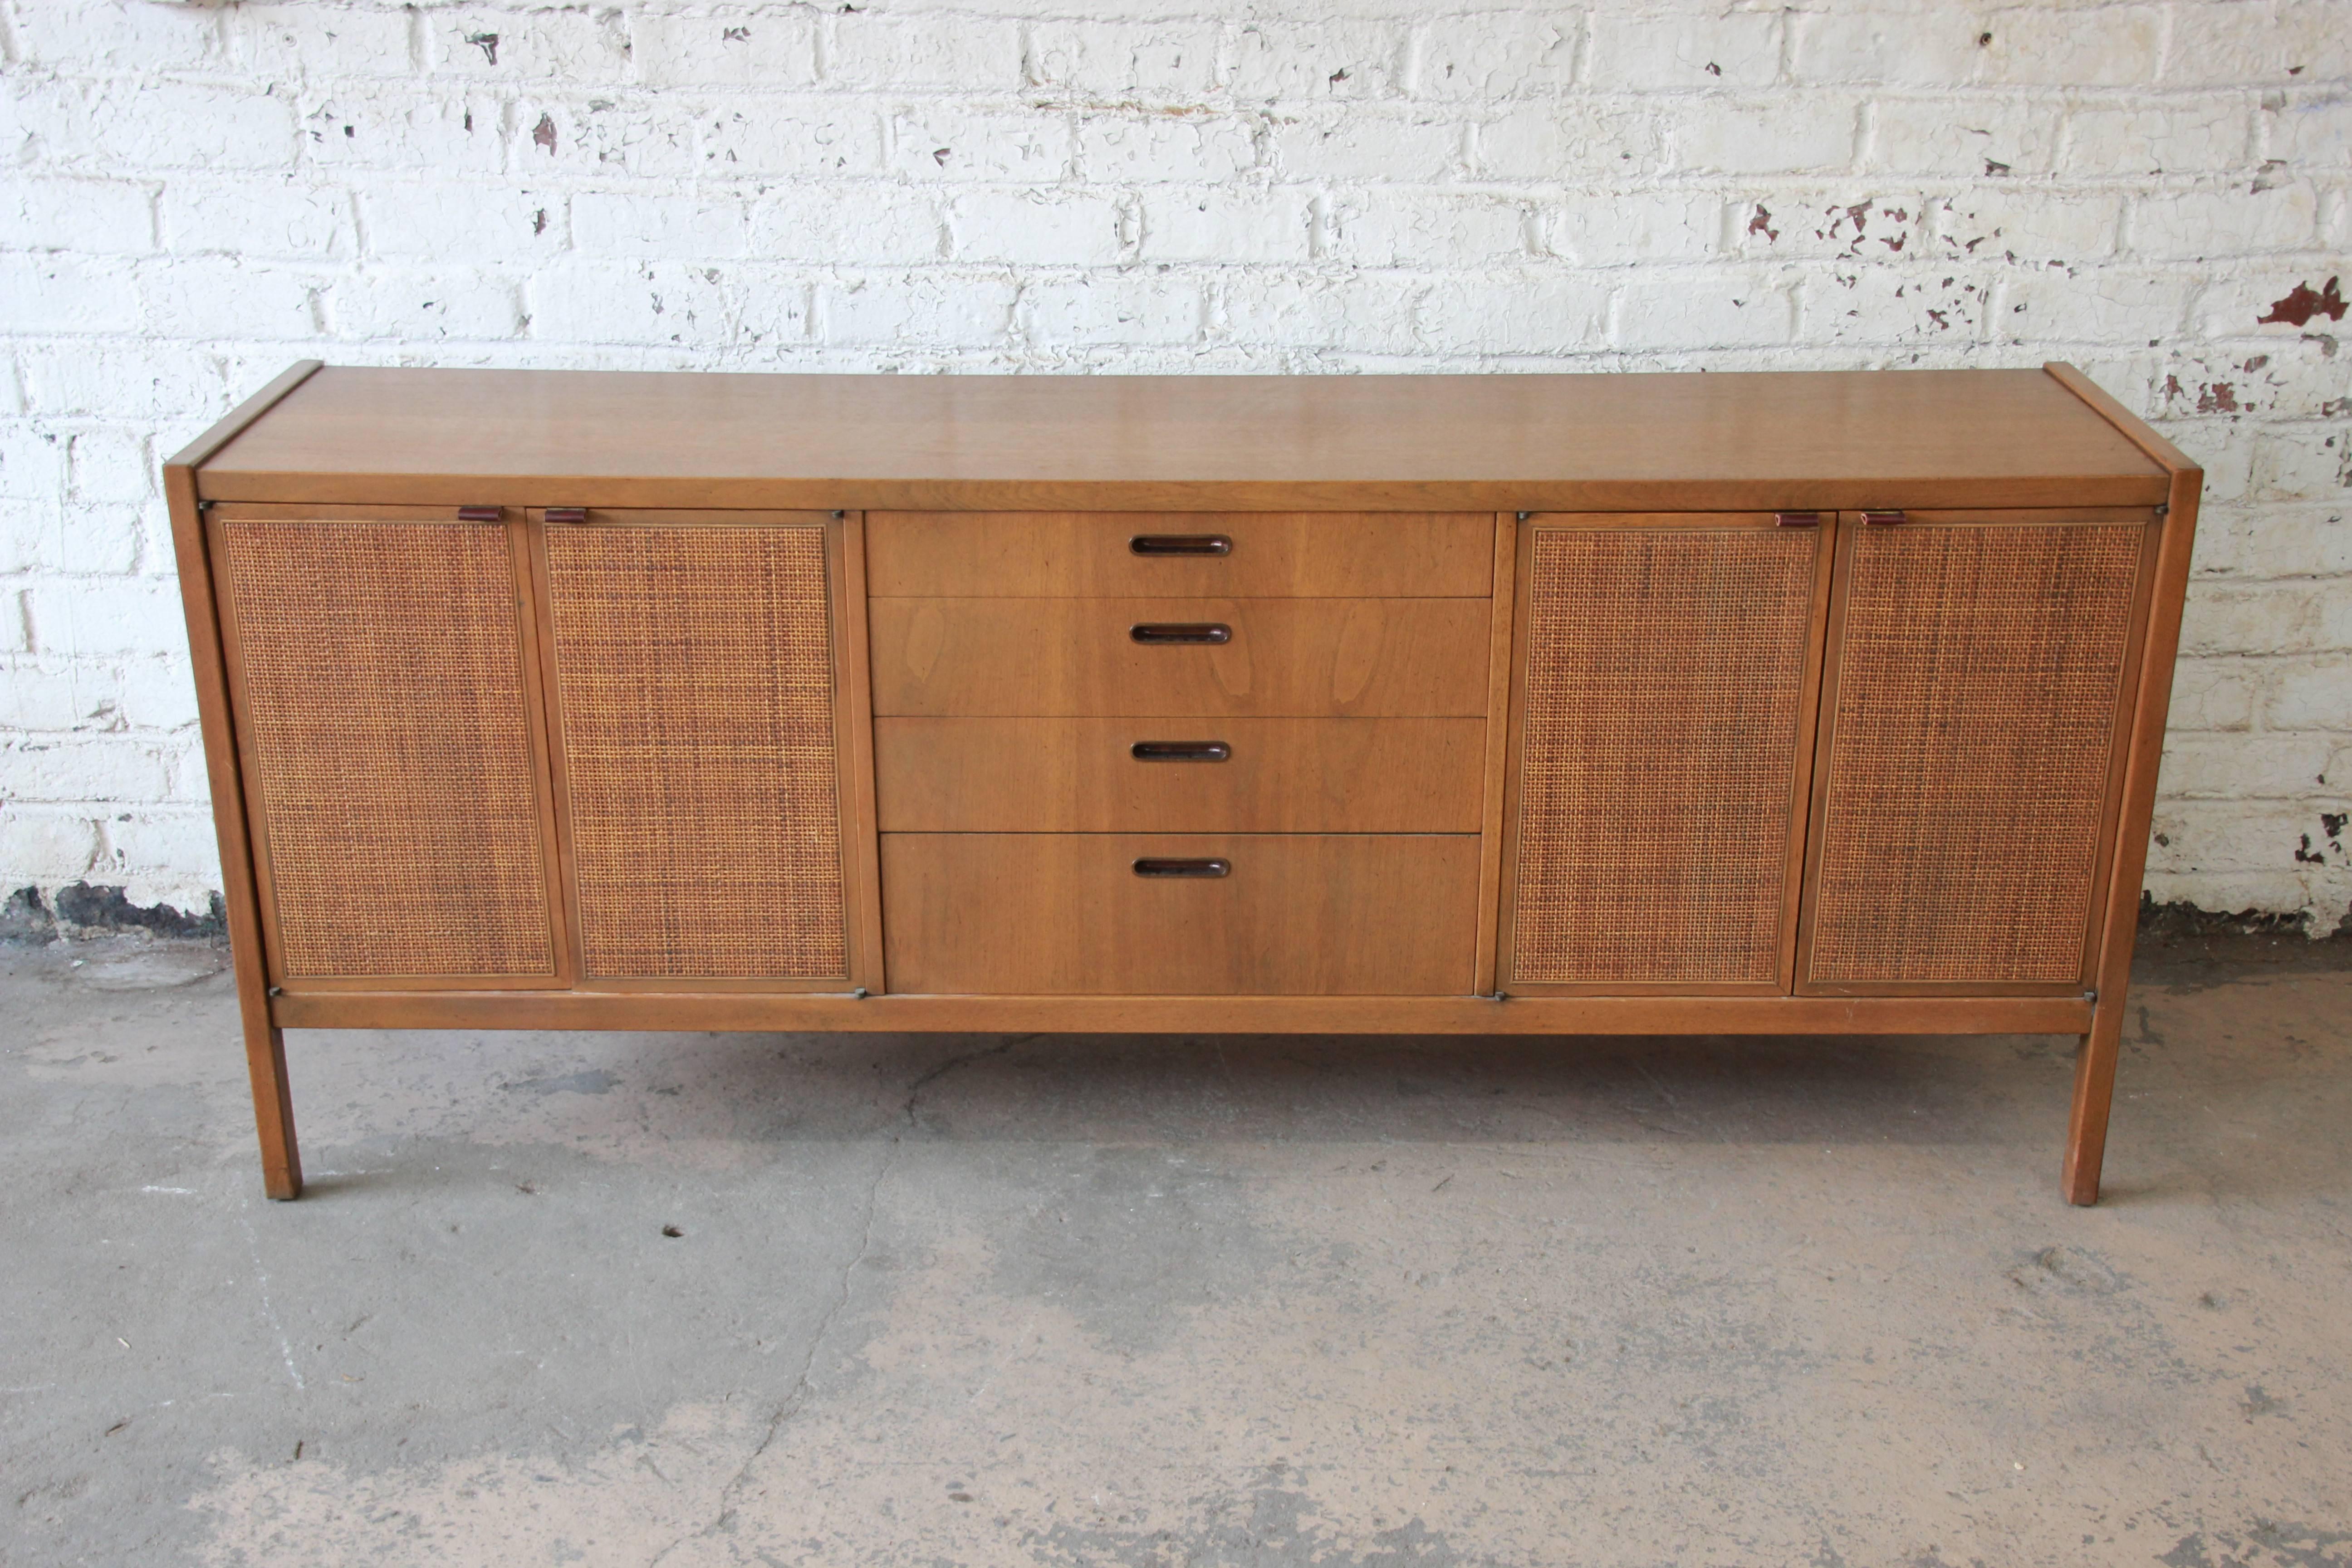 Offering a very nice Mid-Century Modern credenza with woven front doors by Founders. This credenza has two woven front cabinet doors on each side with genuine leather pulls. The doors open up to an adjustable shelf for storage. The center has four